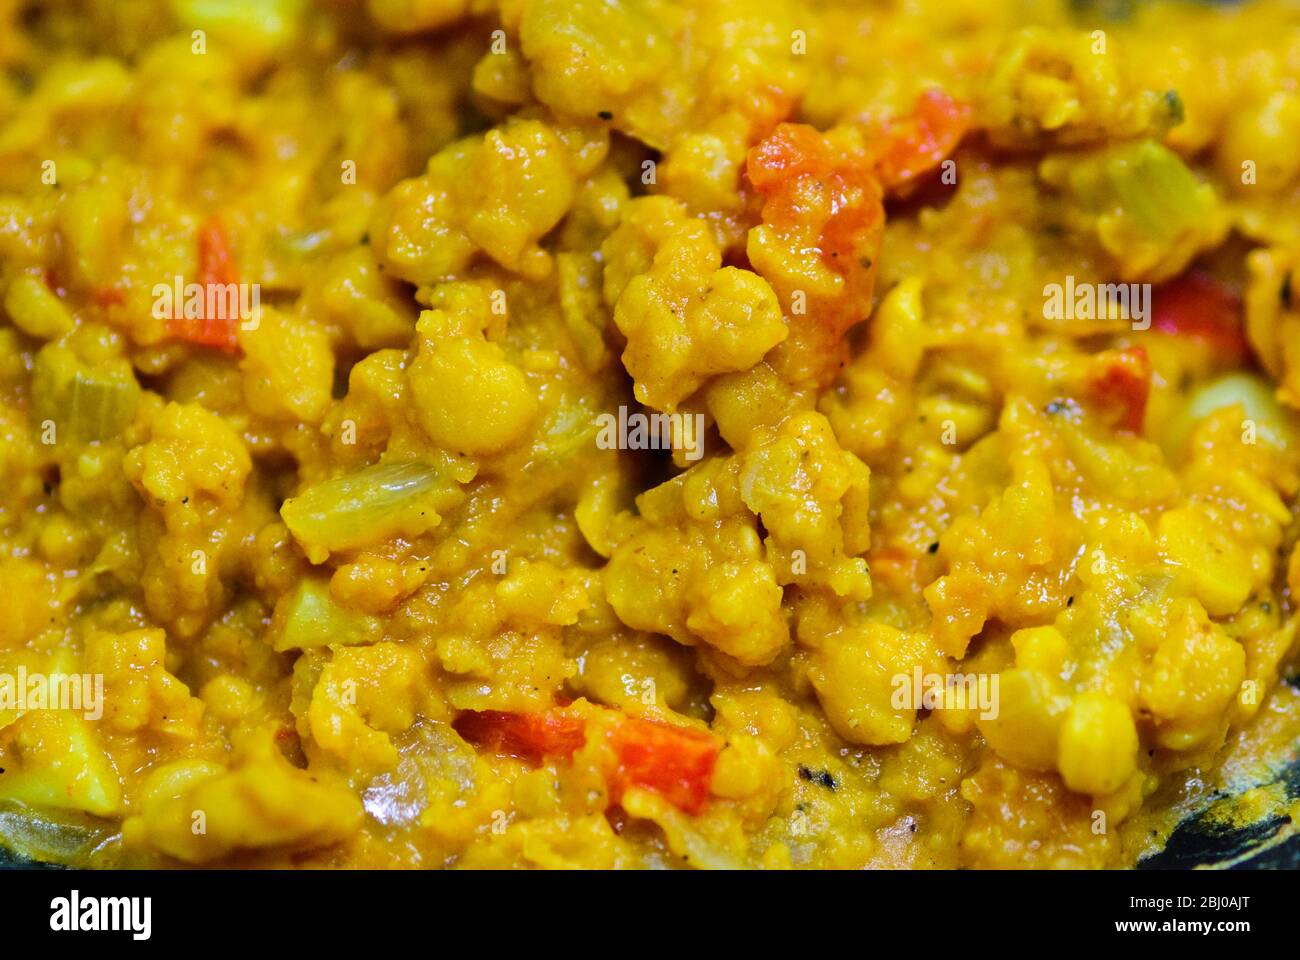 Chana dal, the Indian variet of chickpea cooked with spices. Recipe available - Stock Photo